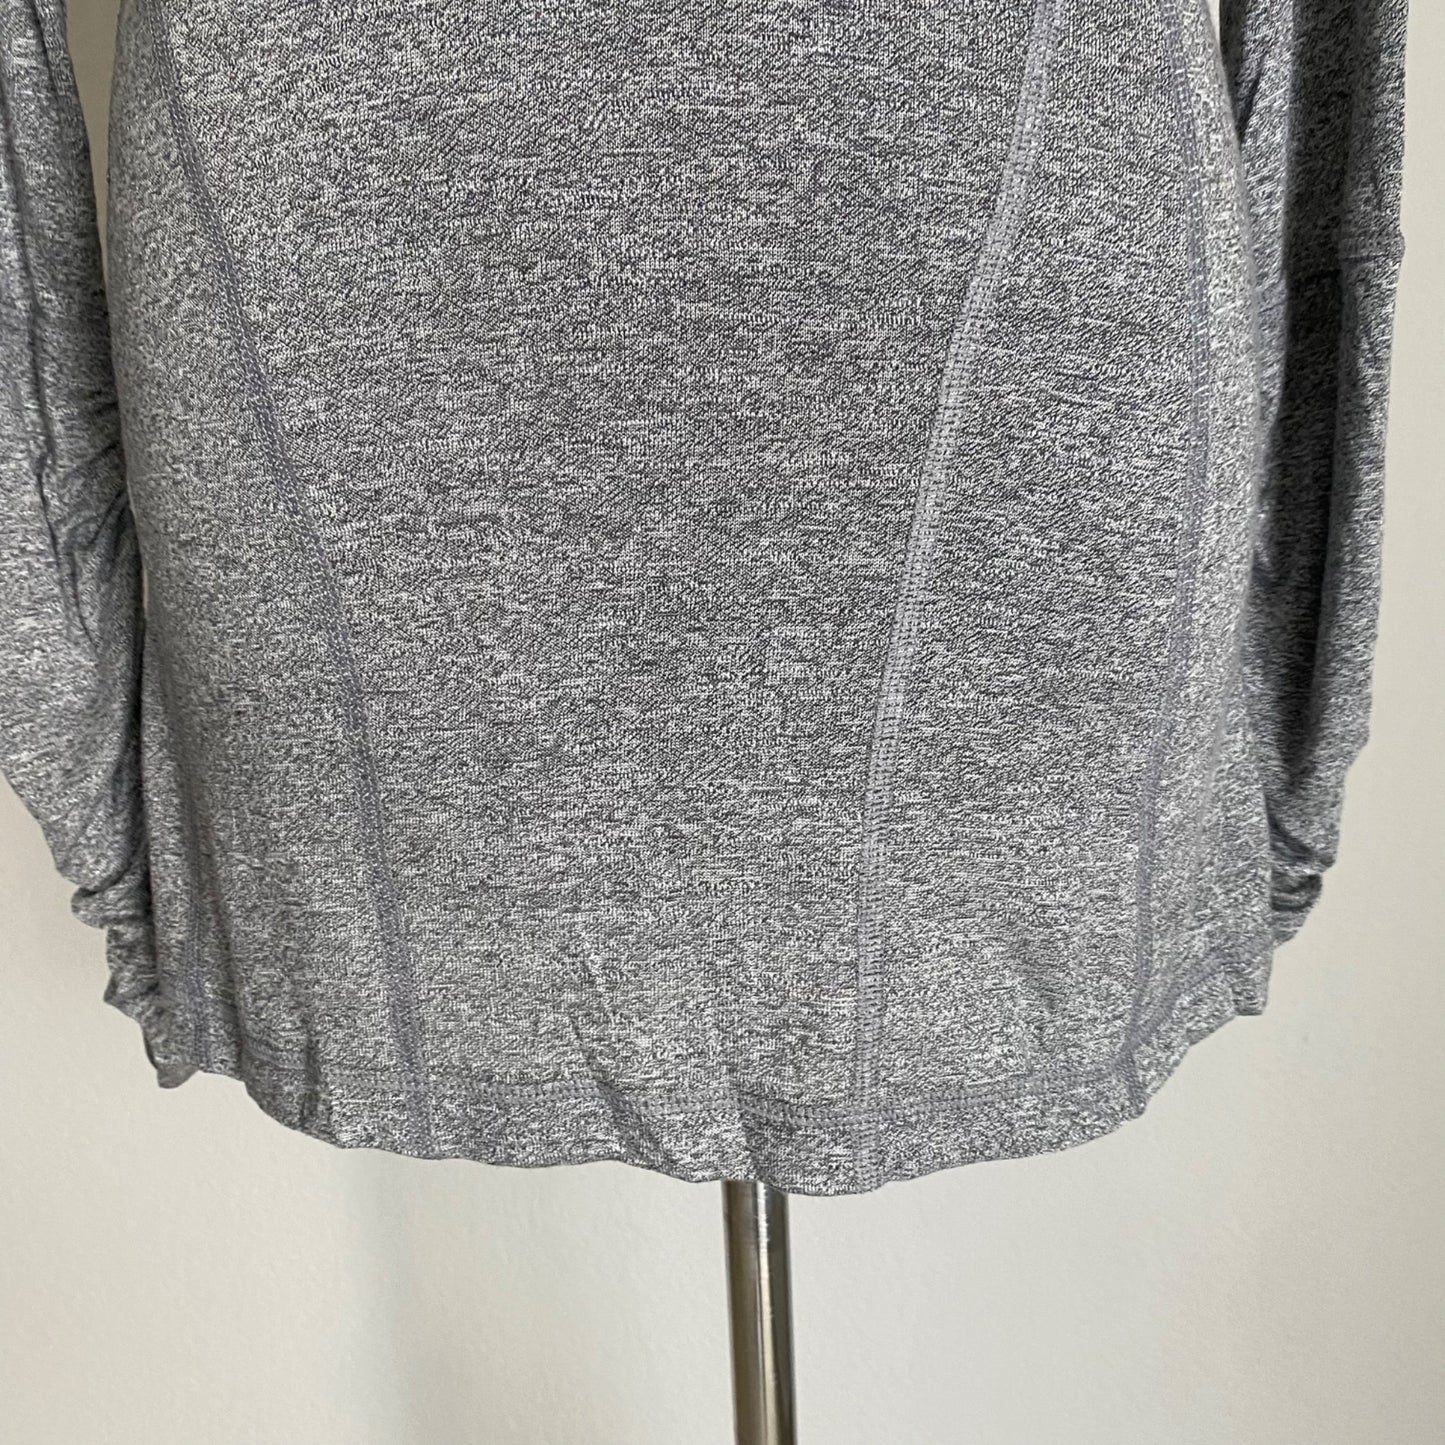 Zella sz S Nordstroms Cowl neck hooded long sleeve fit and flare top